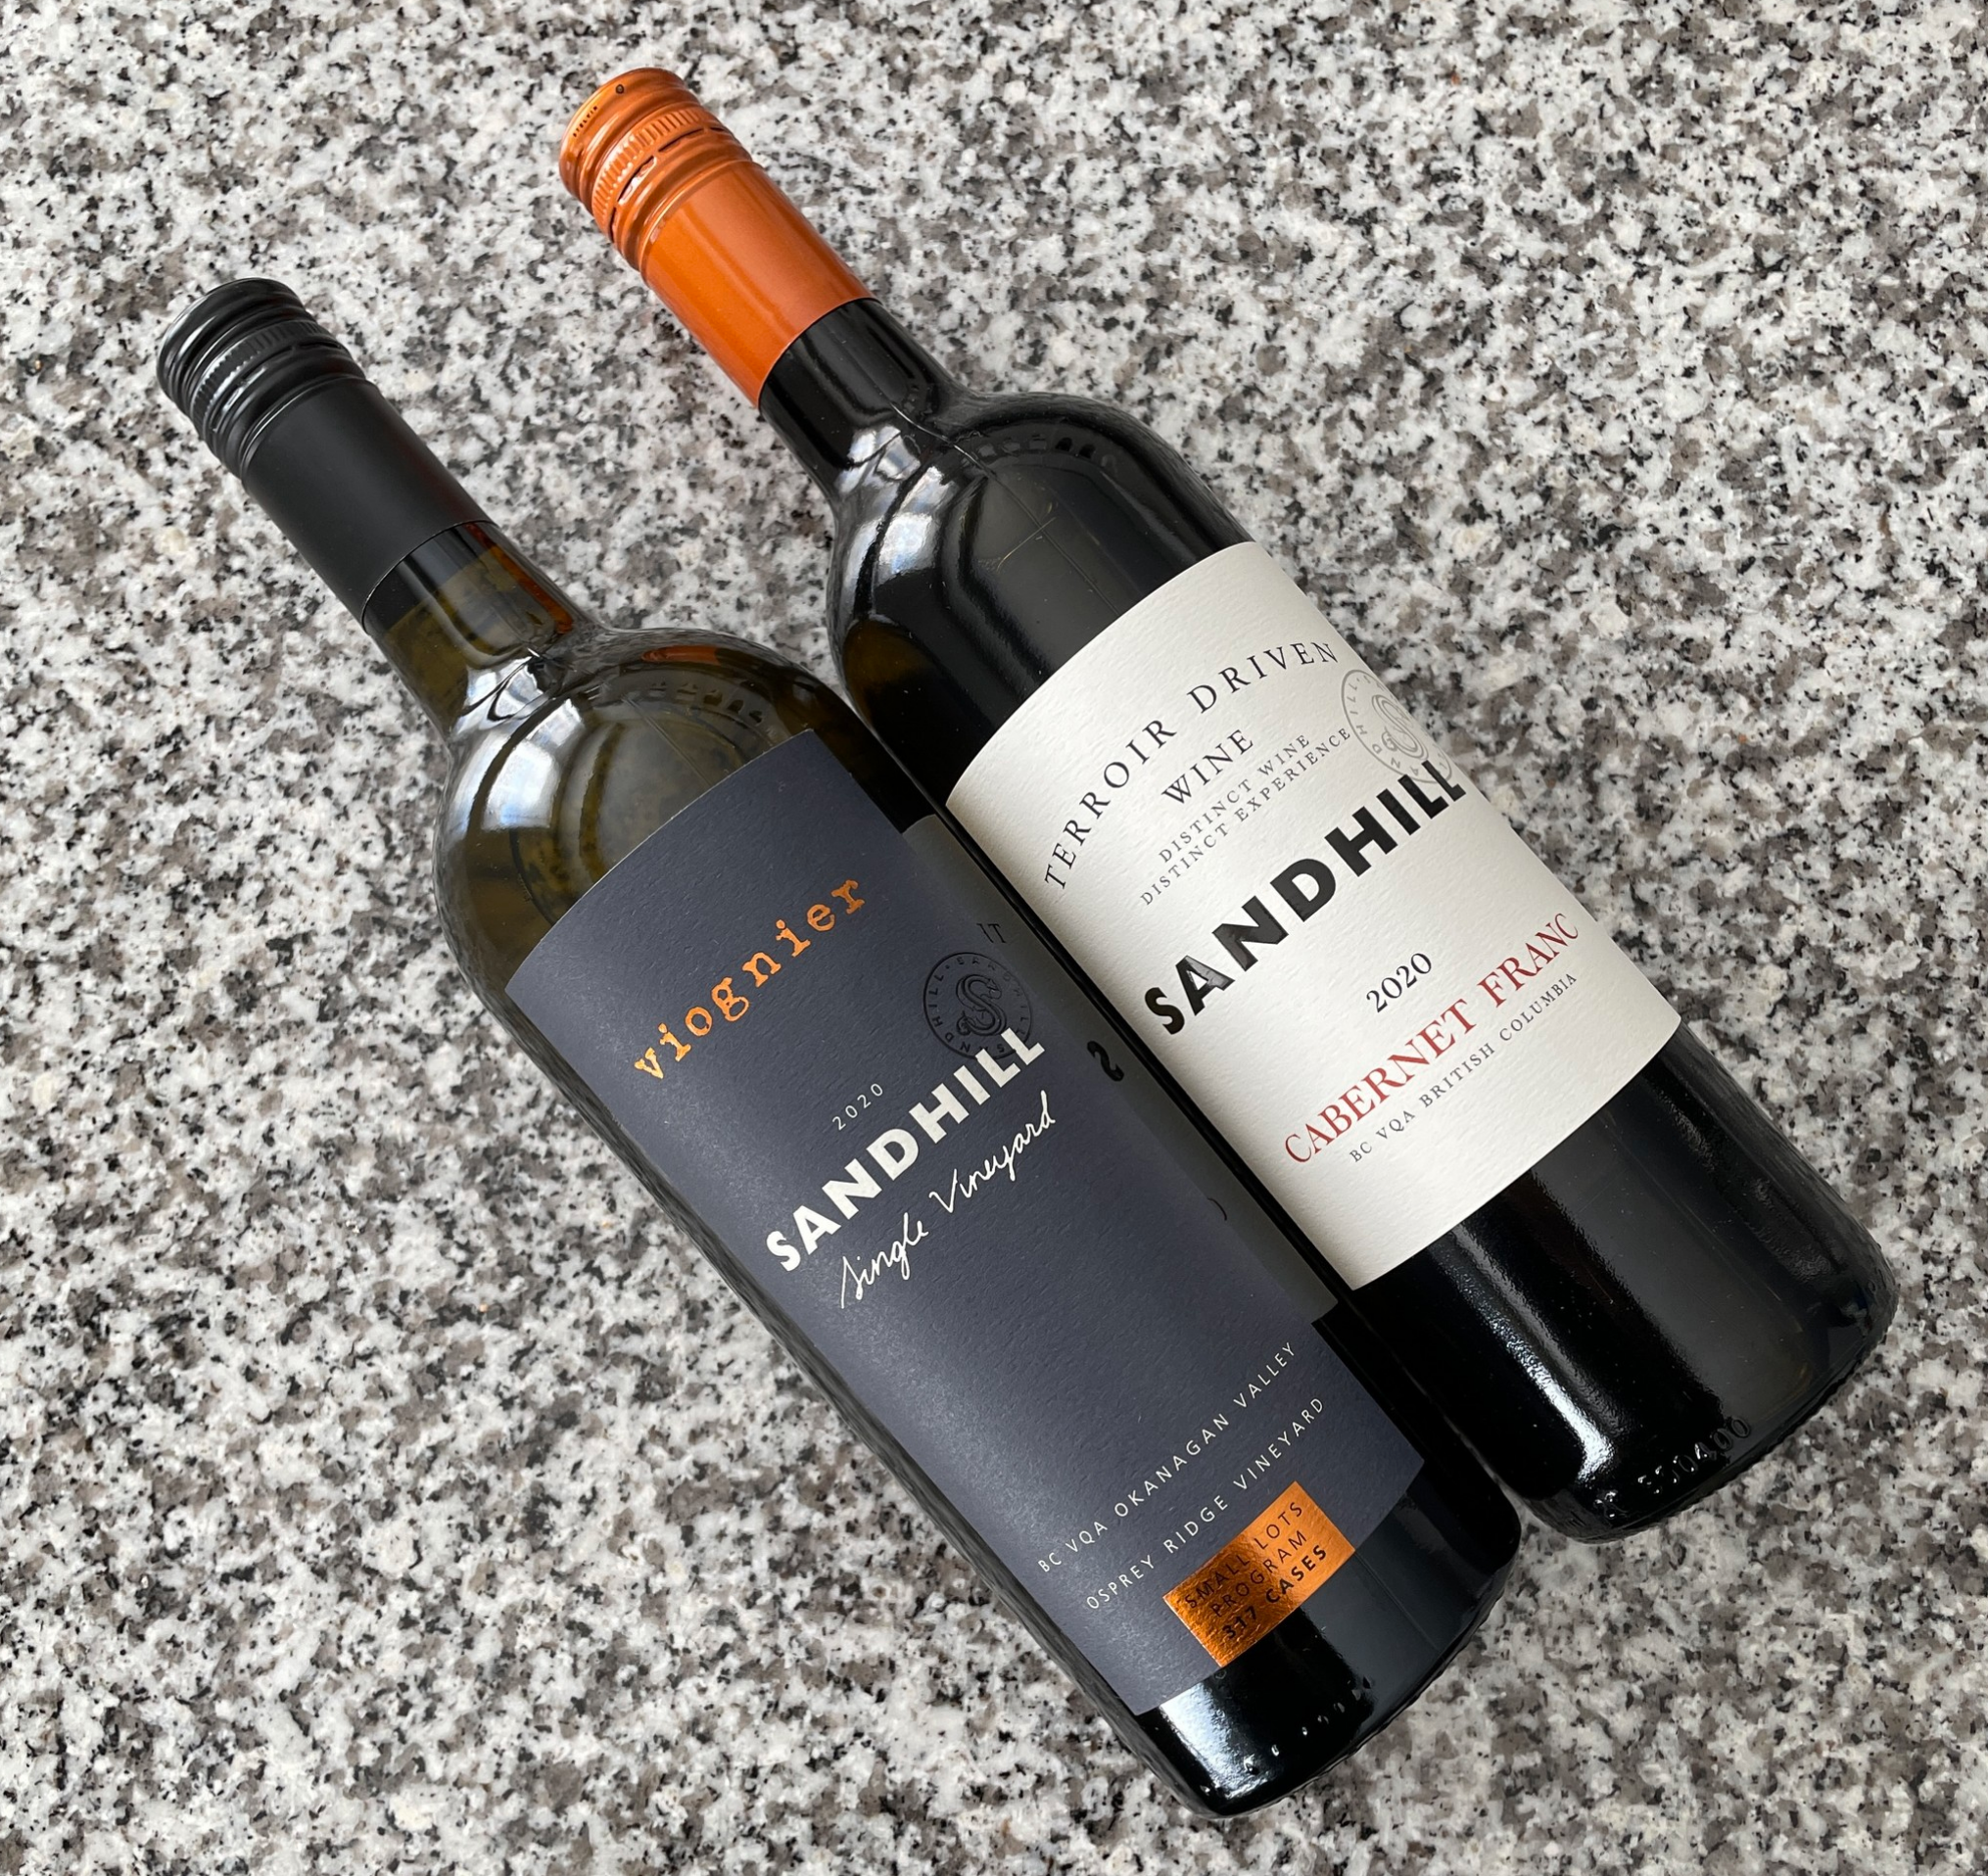 My Wine Canada Wine Of The Month Club Reviews: Get All The Details At Hello  Subscription!